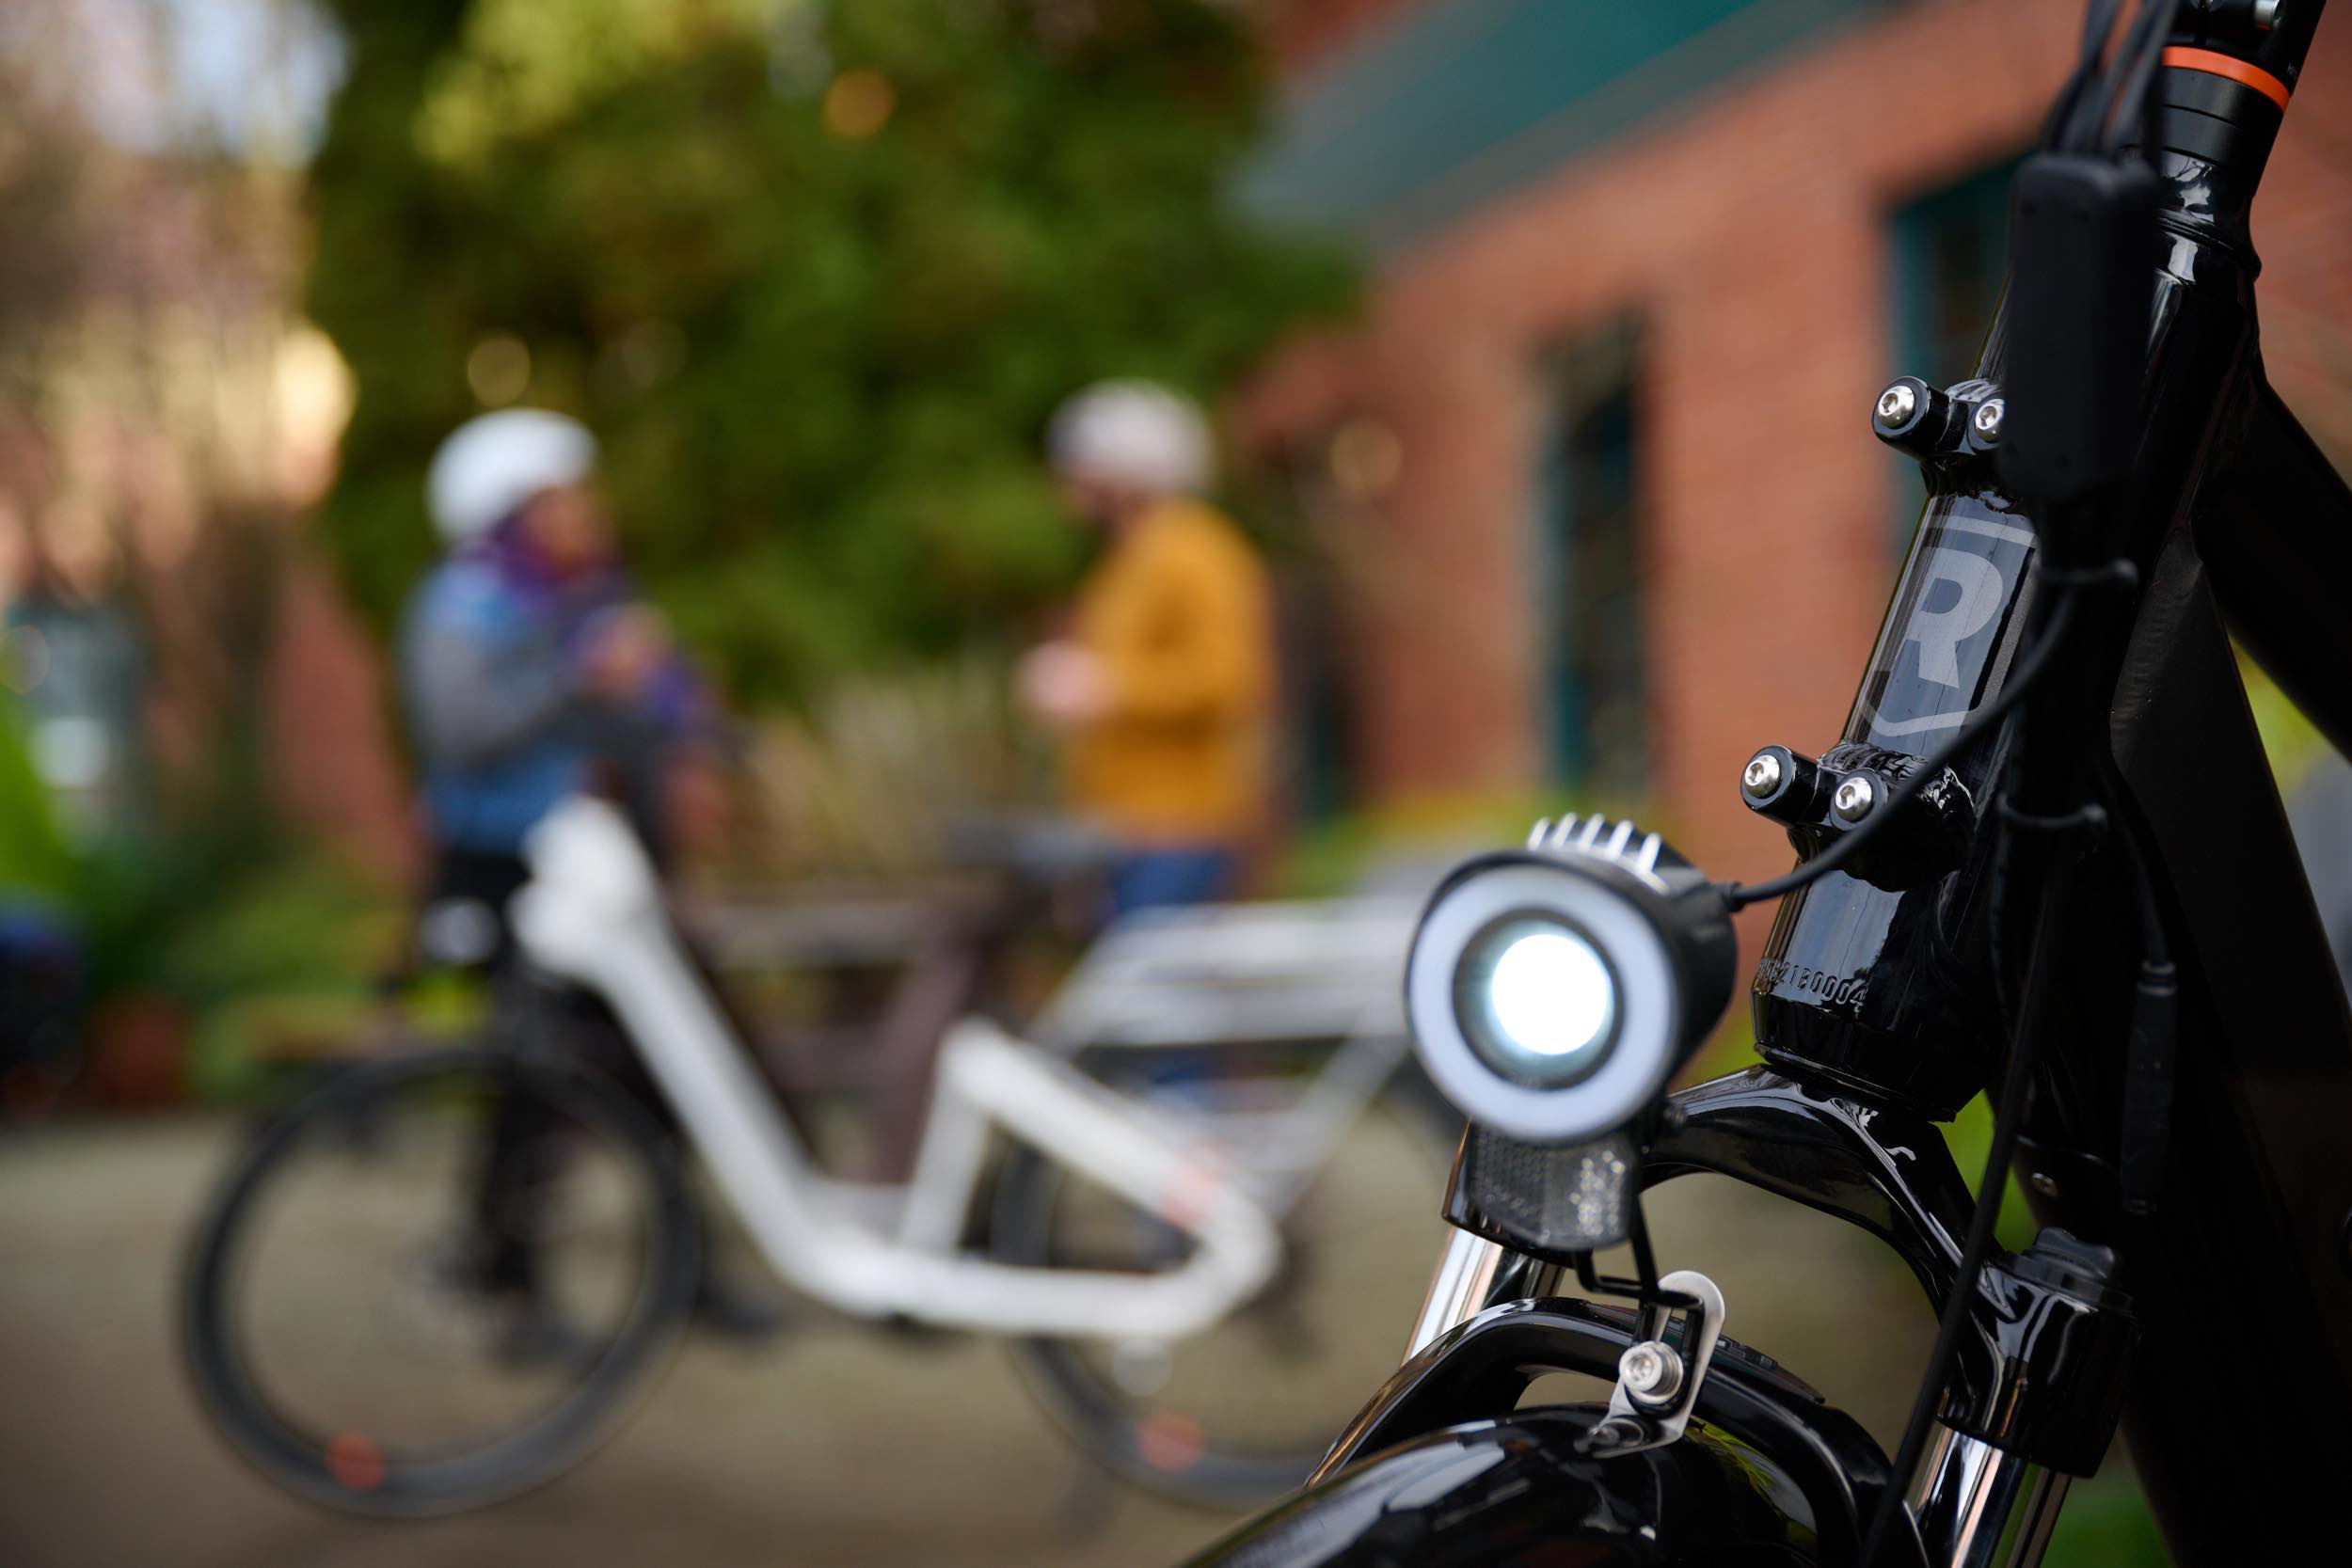 A close-up of an ebike headlight in the rain. In the background, a man and woman chat alongside their bikes.